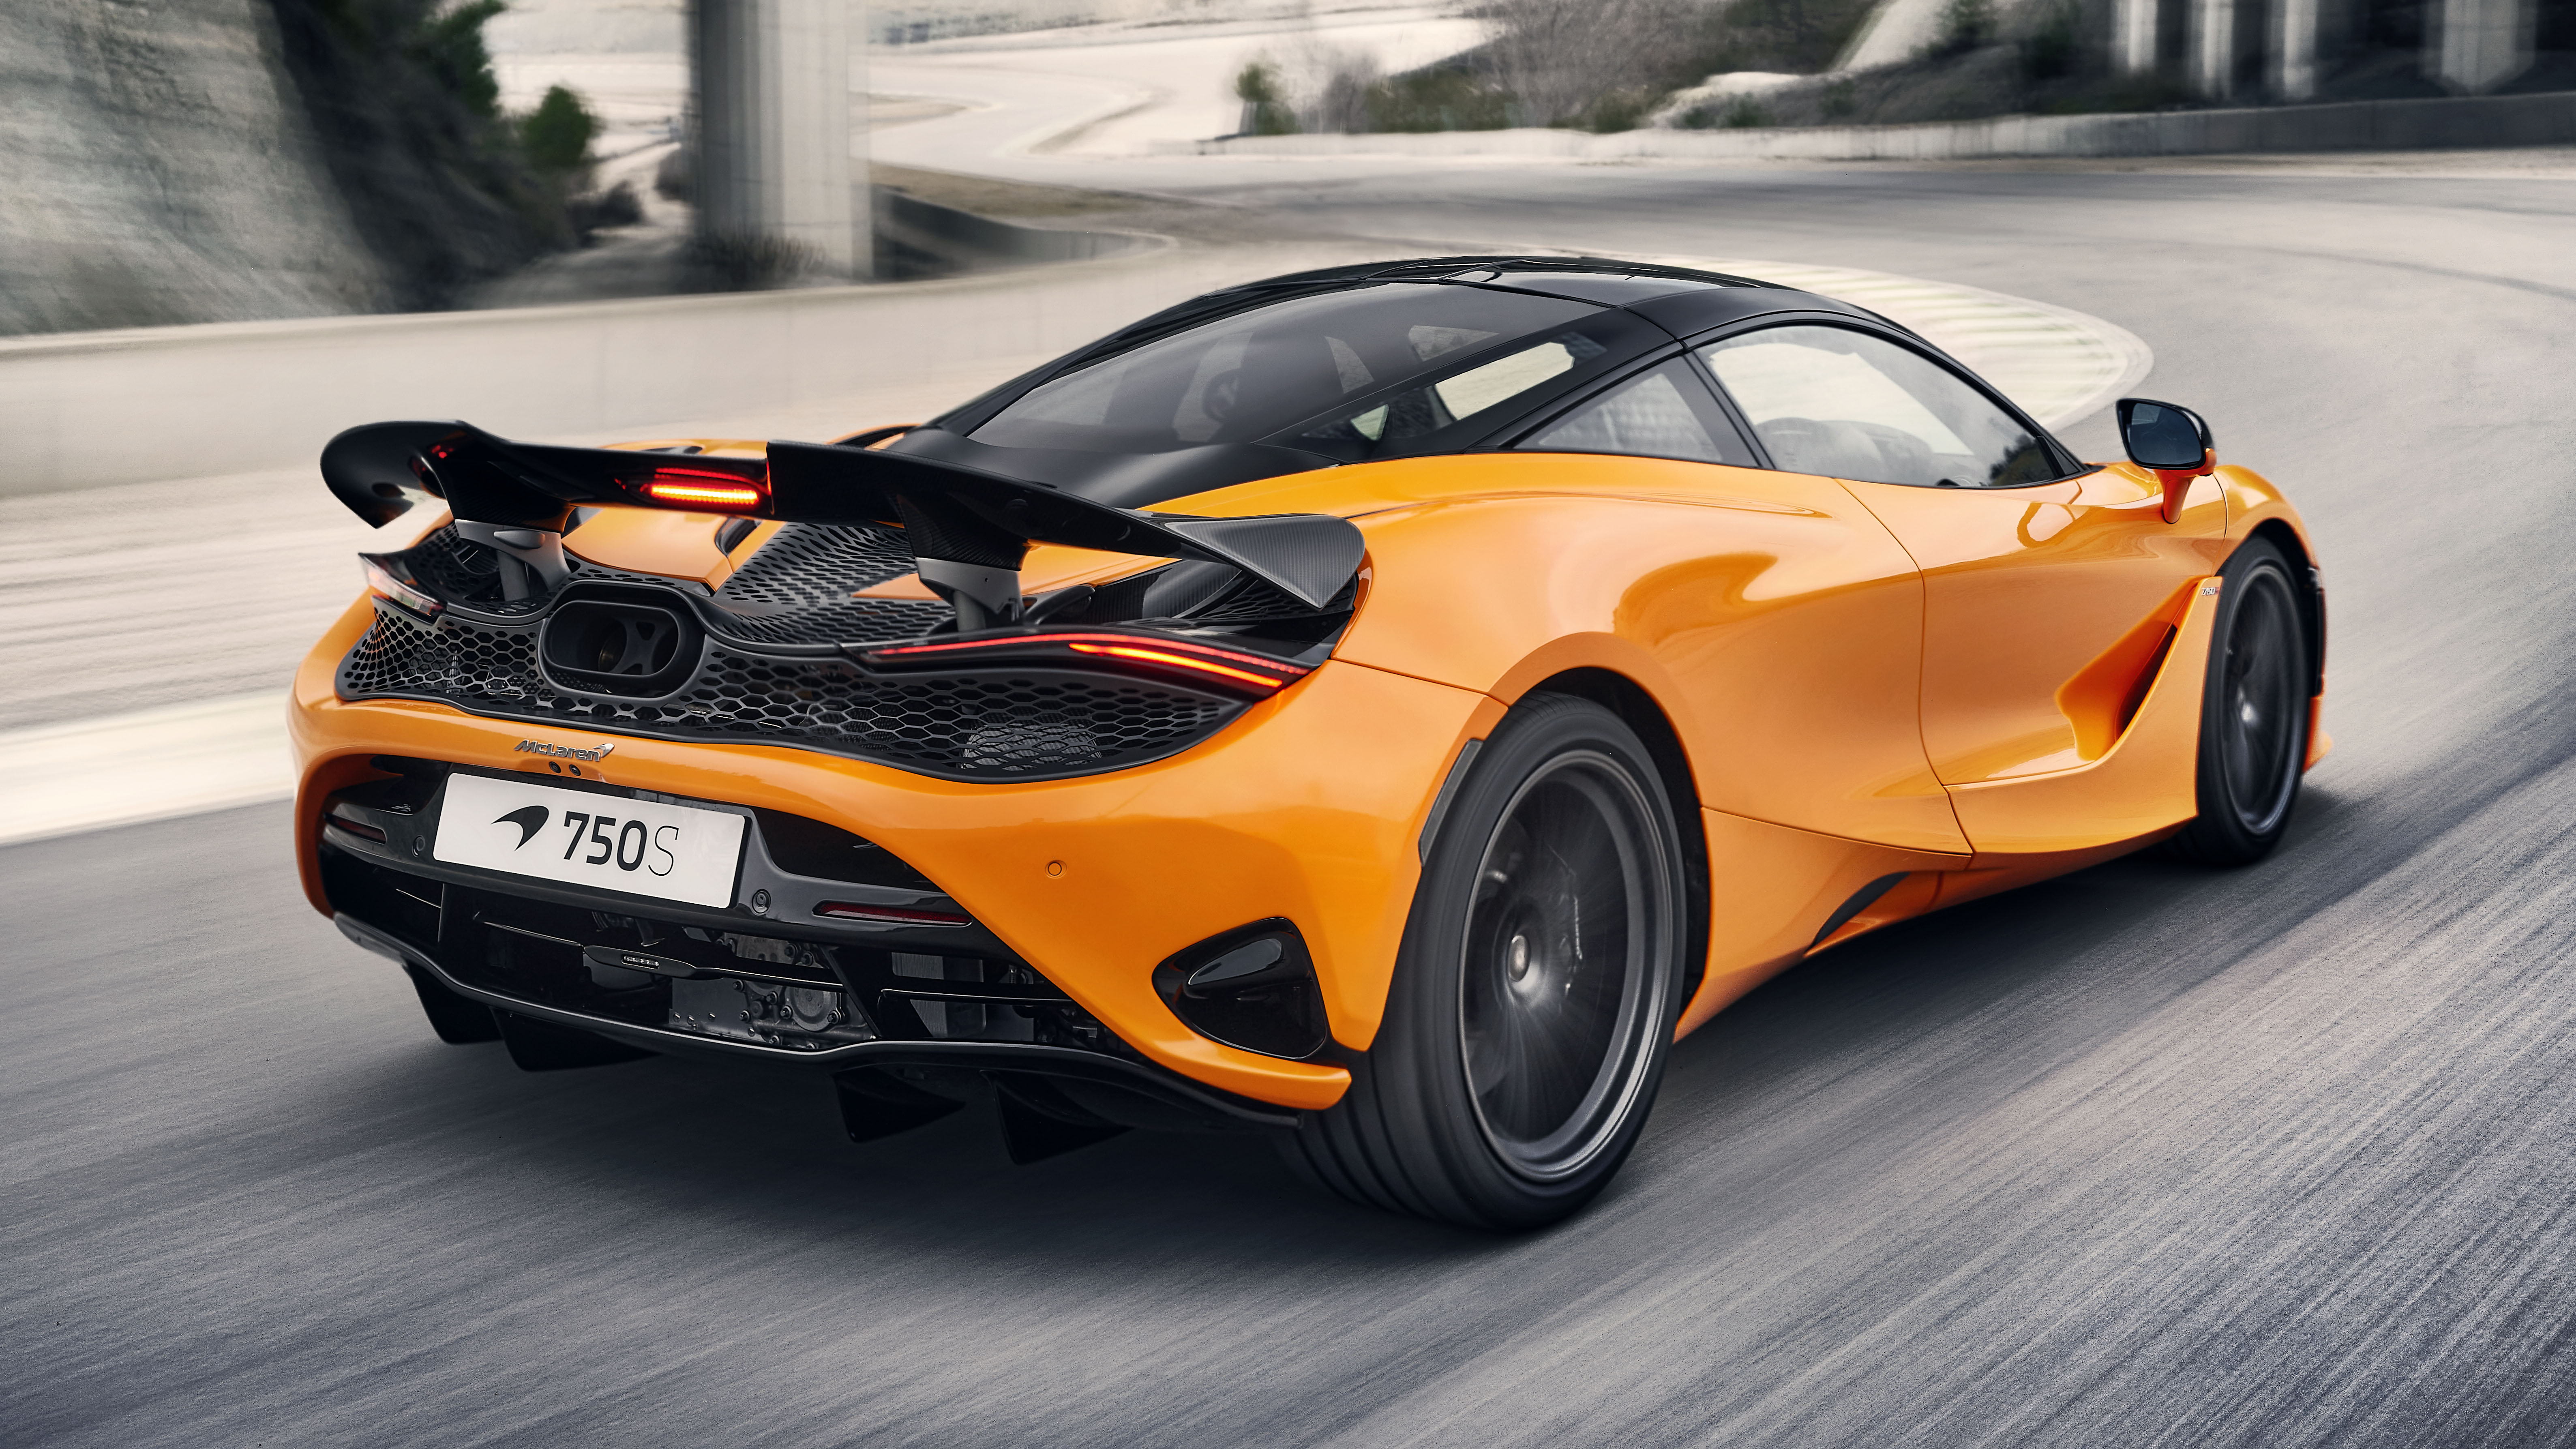 The new McLaren 750S is a 720S turned up a notch